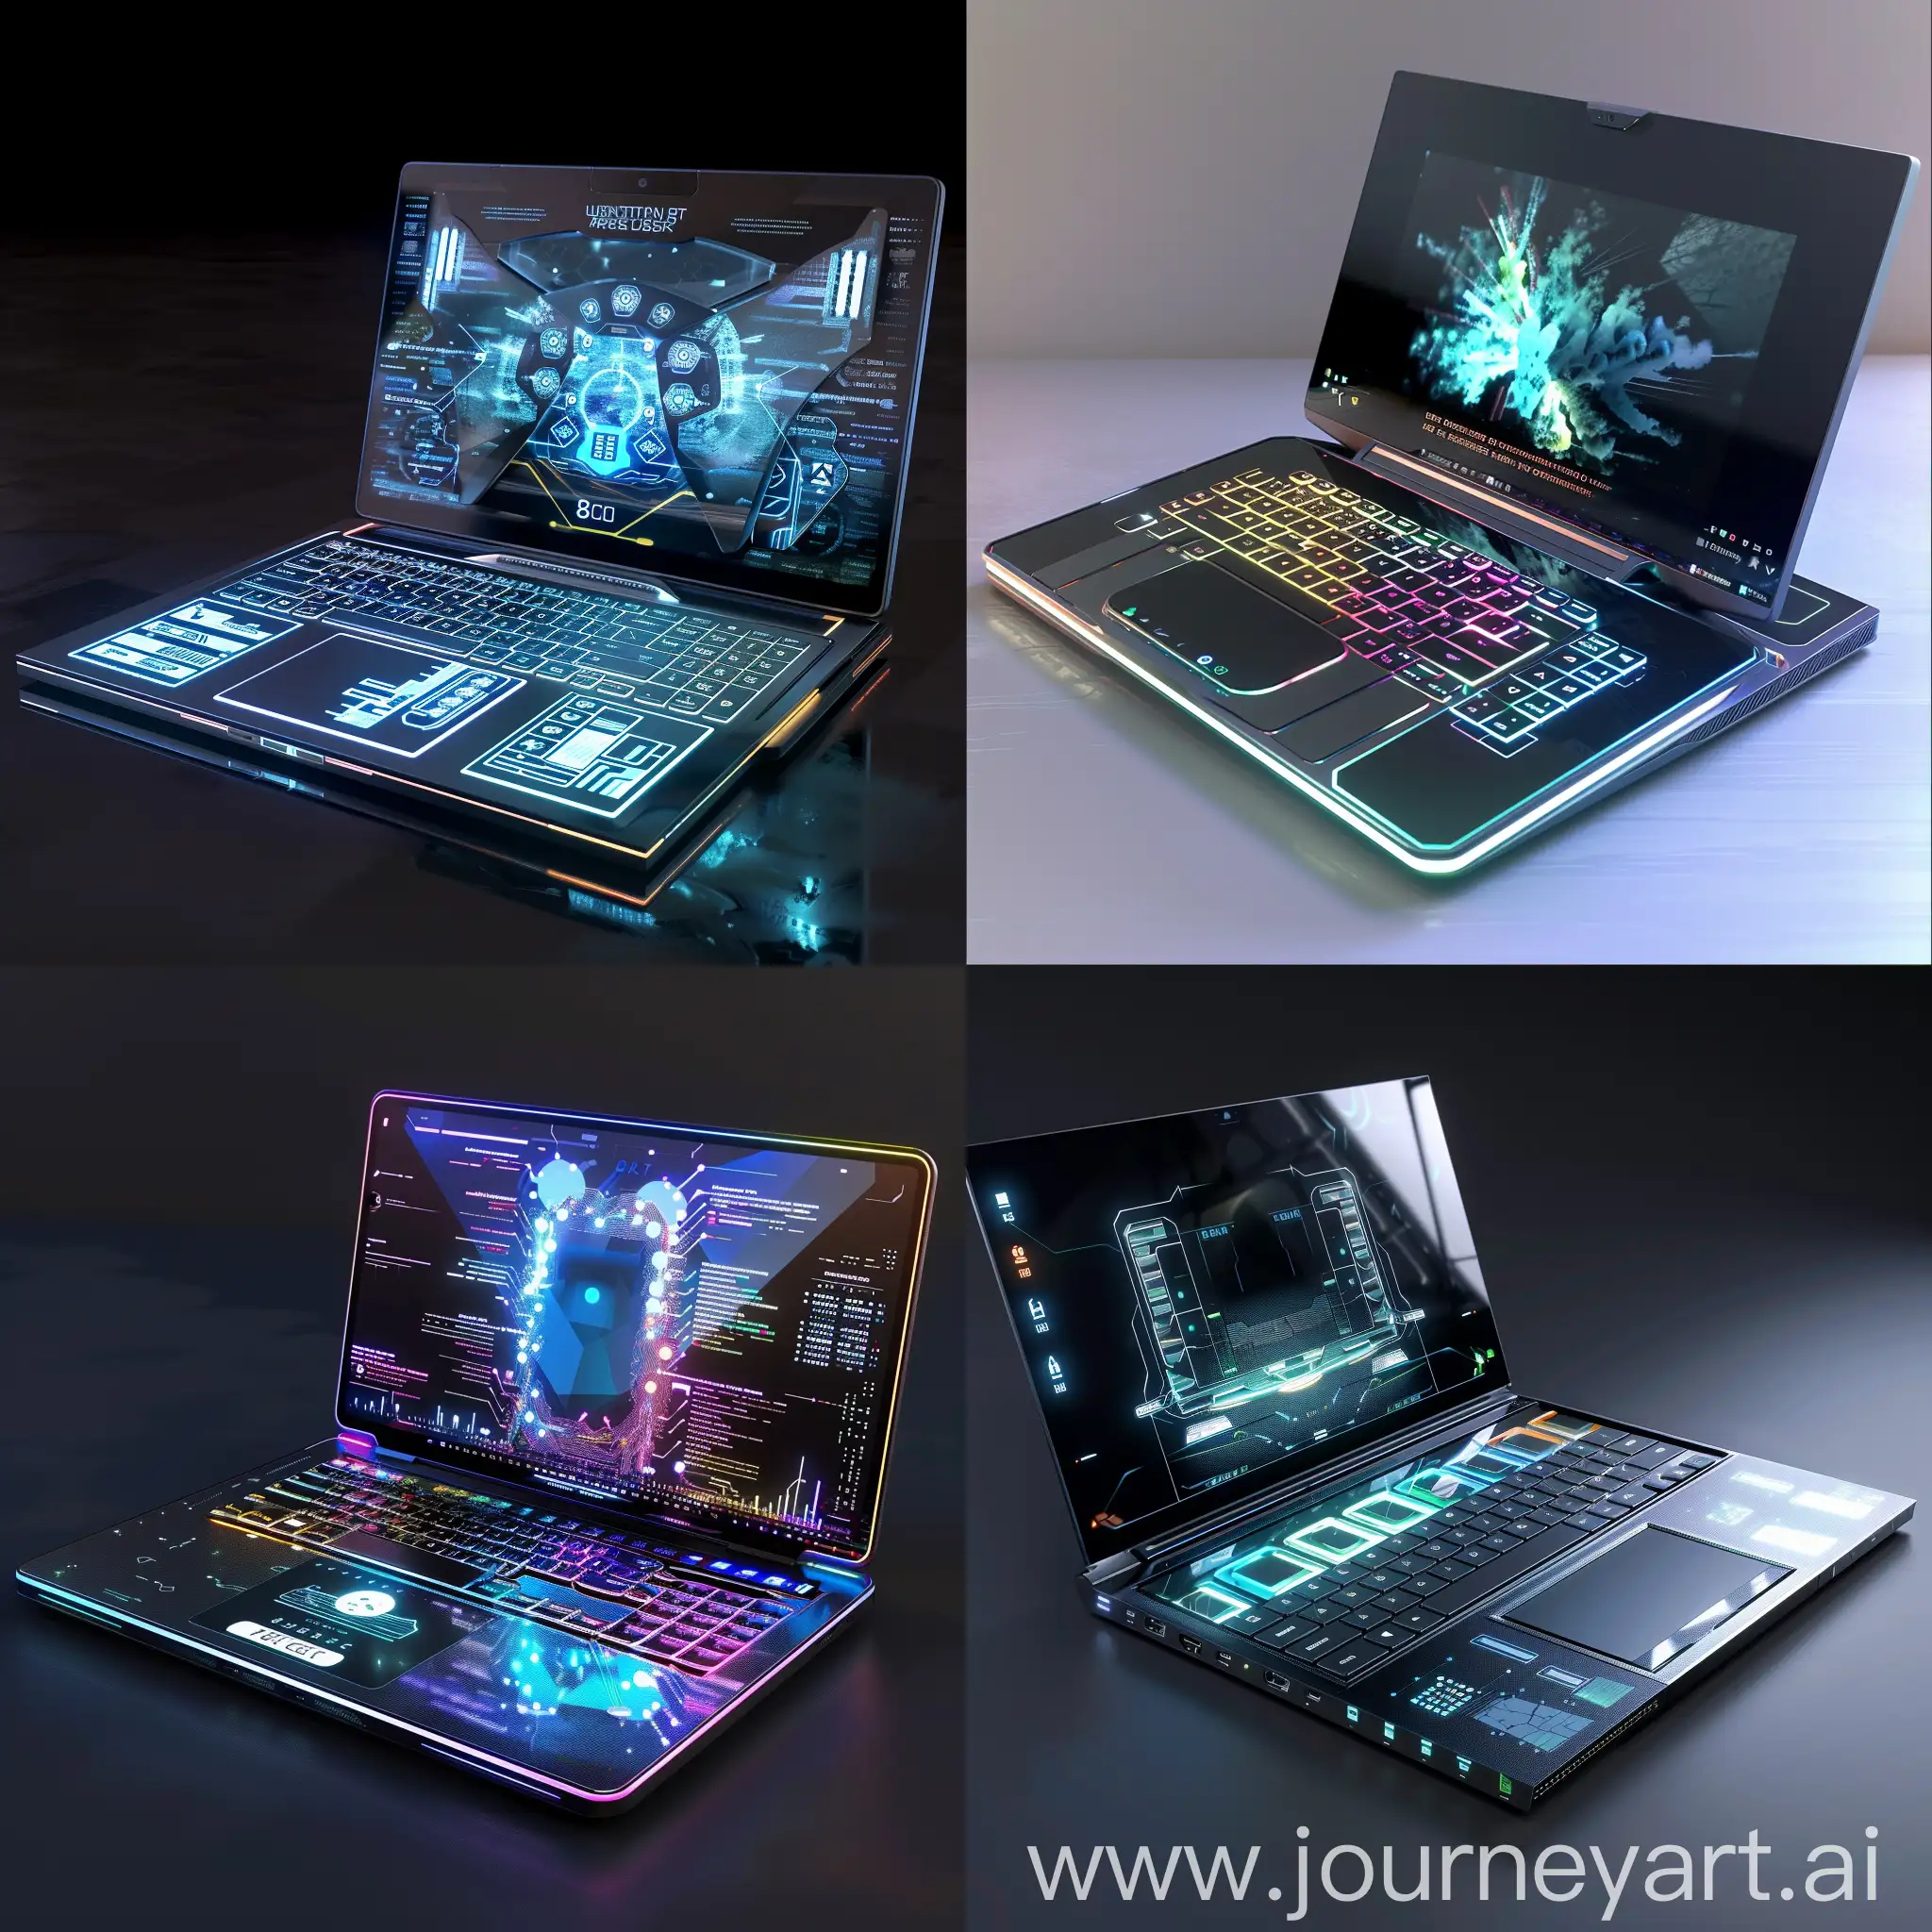 Futuristic laptop, in futuristic style, Quantum Processor, Graphene-based Cooling System, Neural Interface, Advanced Energy Storage, Optical Computing, Self-Repairing Components, Holographic Display, Biometric Security Enhancements, Nanotechnology Sensors, Quantum Encryption, Flexible Display, Transparent Touchpad/Keyboard, Smart Projection System, Adaptive Surface Material, Integrated Solar Panels, Dynamic Ambient Lighting, Modular Expansion Ports, Biometric Feedback Sensors, Active Air Filtration System, Gesture Recognition Cameras, 8K OLED Display, Holographic Display Enhancement, AI-Powered Upscaling, High-Fidelity Audio System, Next-Gen Graphics Card, DDR6 Memory, PCIe 5.0 SSD Storage, Advanced Thermal Management, 5G Connectivity, Eye Tracking Technology, Bezel-less Display, Transparent OLED Lid, Flexible Hinge Design, Ergonomic Keyboard, Interactive Touch Bar, Wireless Charging Base, Multi-functional Ports, Integrated Projector, Advanced Biometric Security, Customizable RGB Lighting, unreal engine 5 --stylize 1000